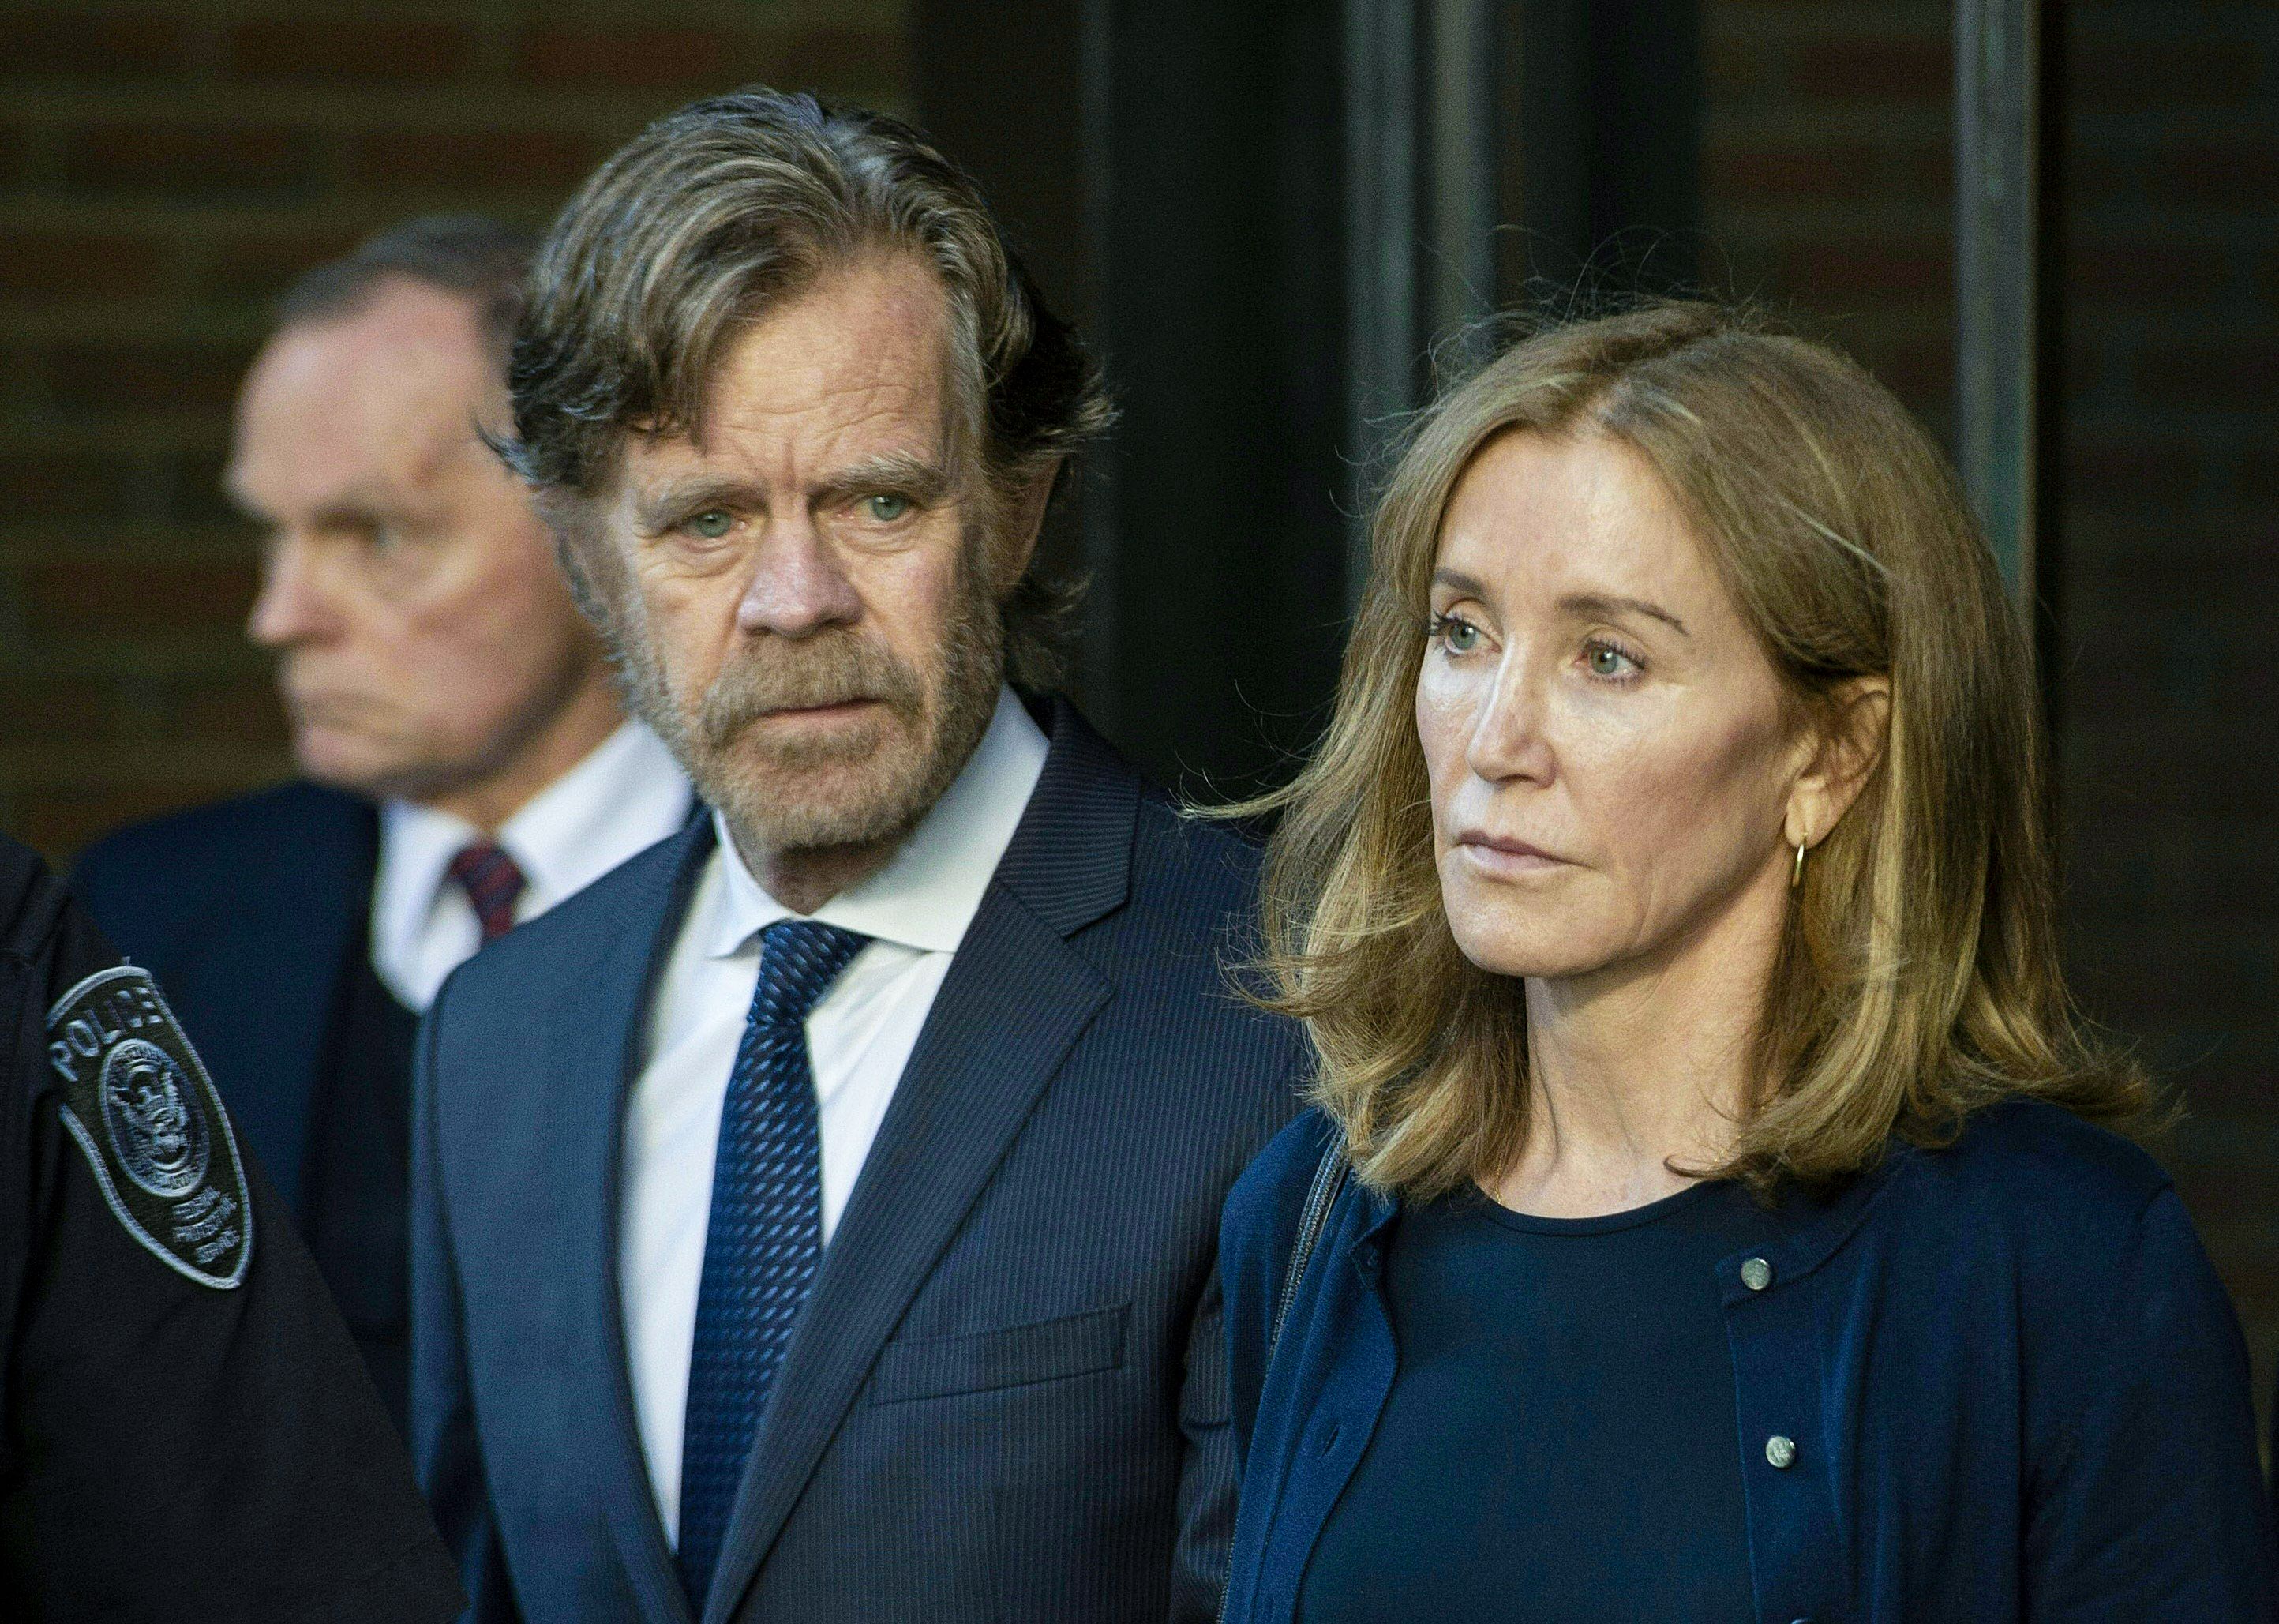 Felicity Huffman with her husband William H. Macy in Boston in 2019 | Source: Getty Images